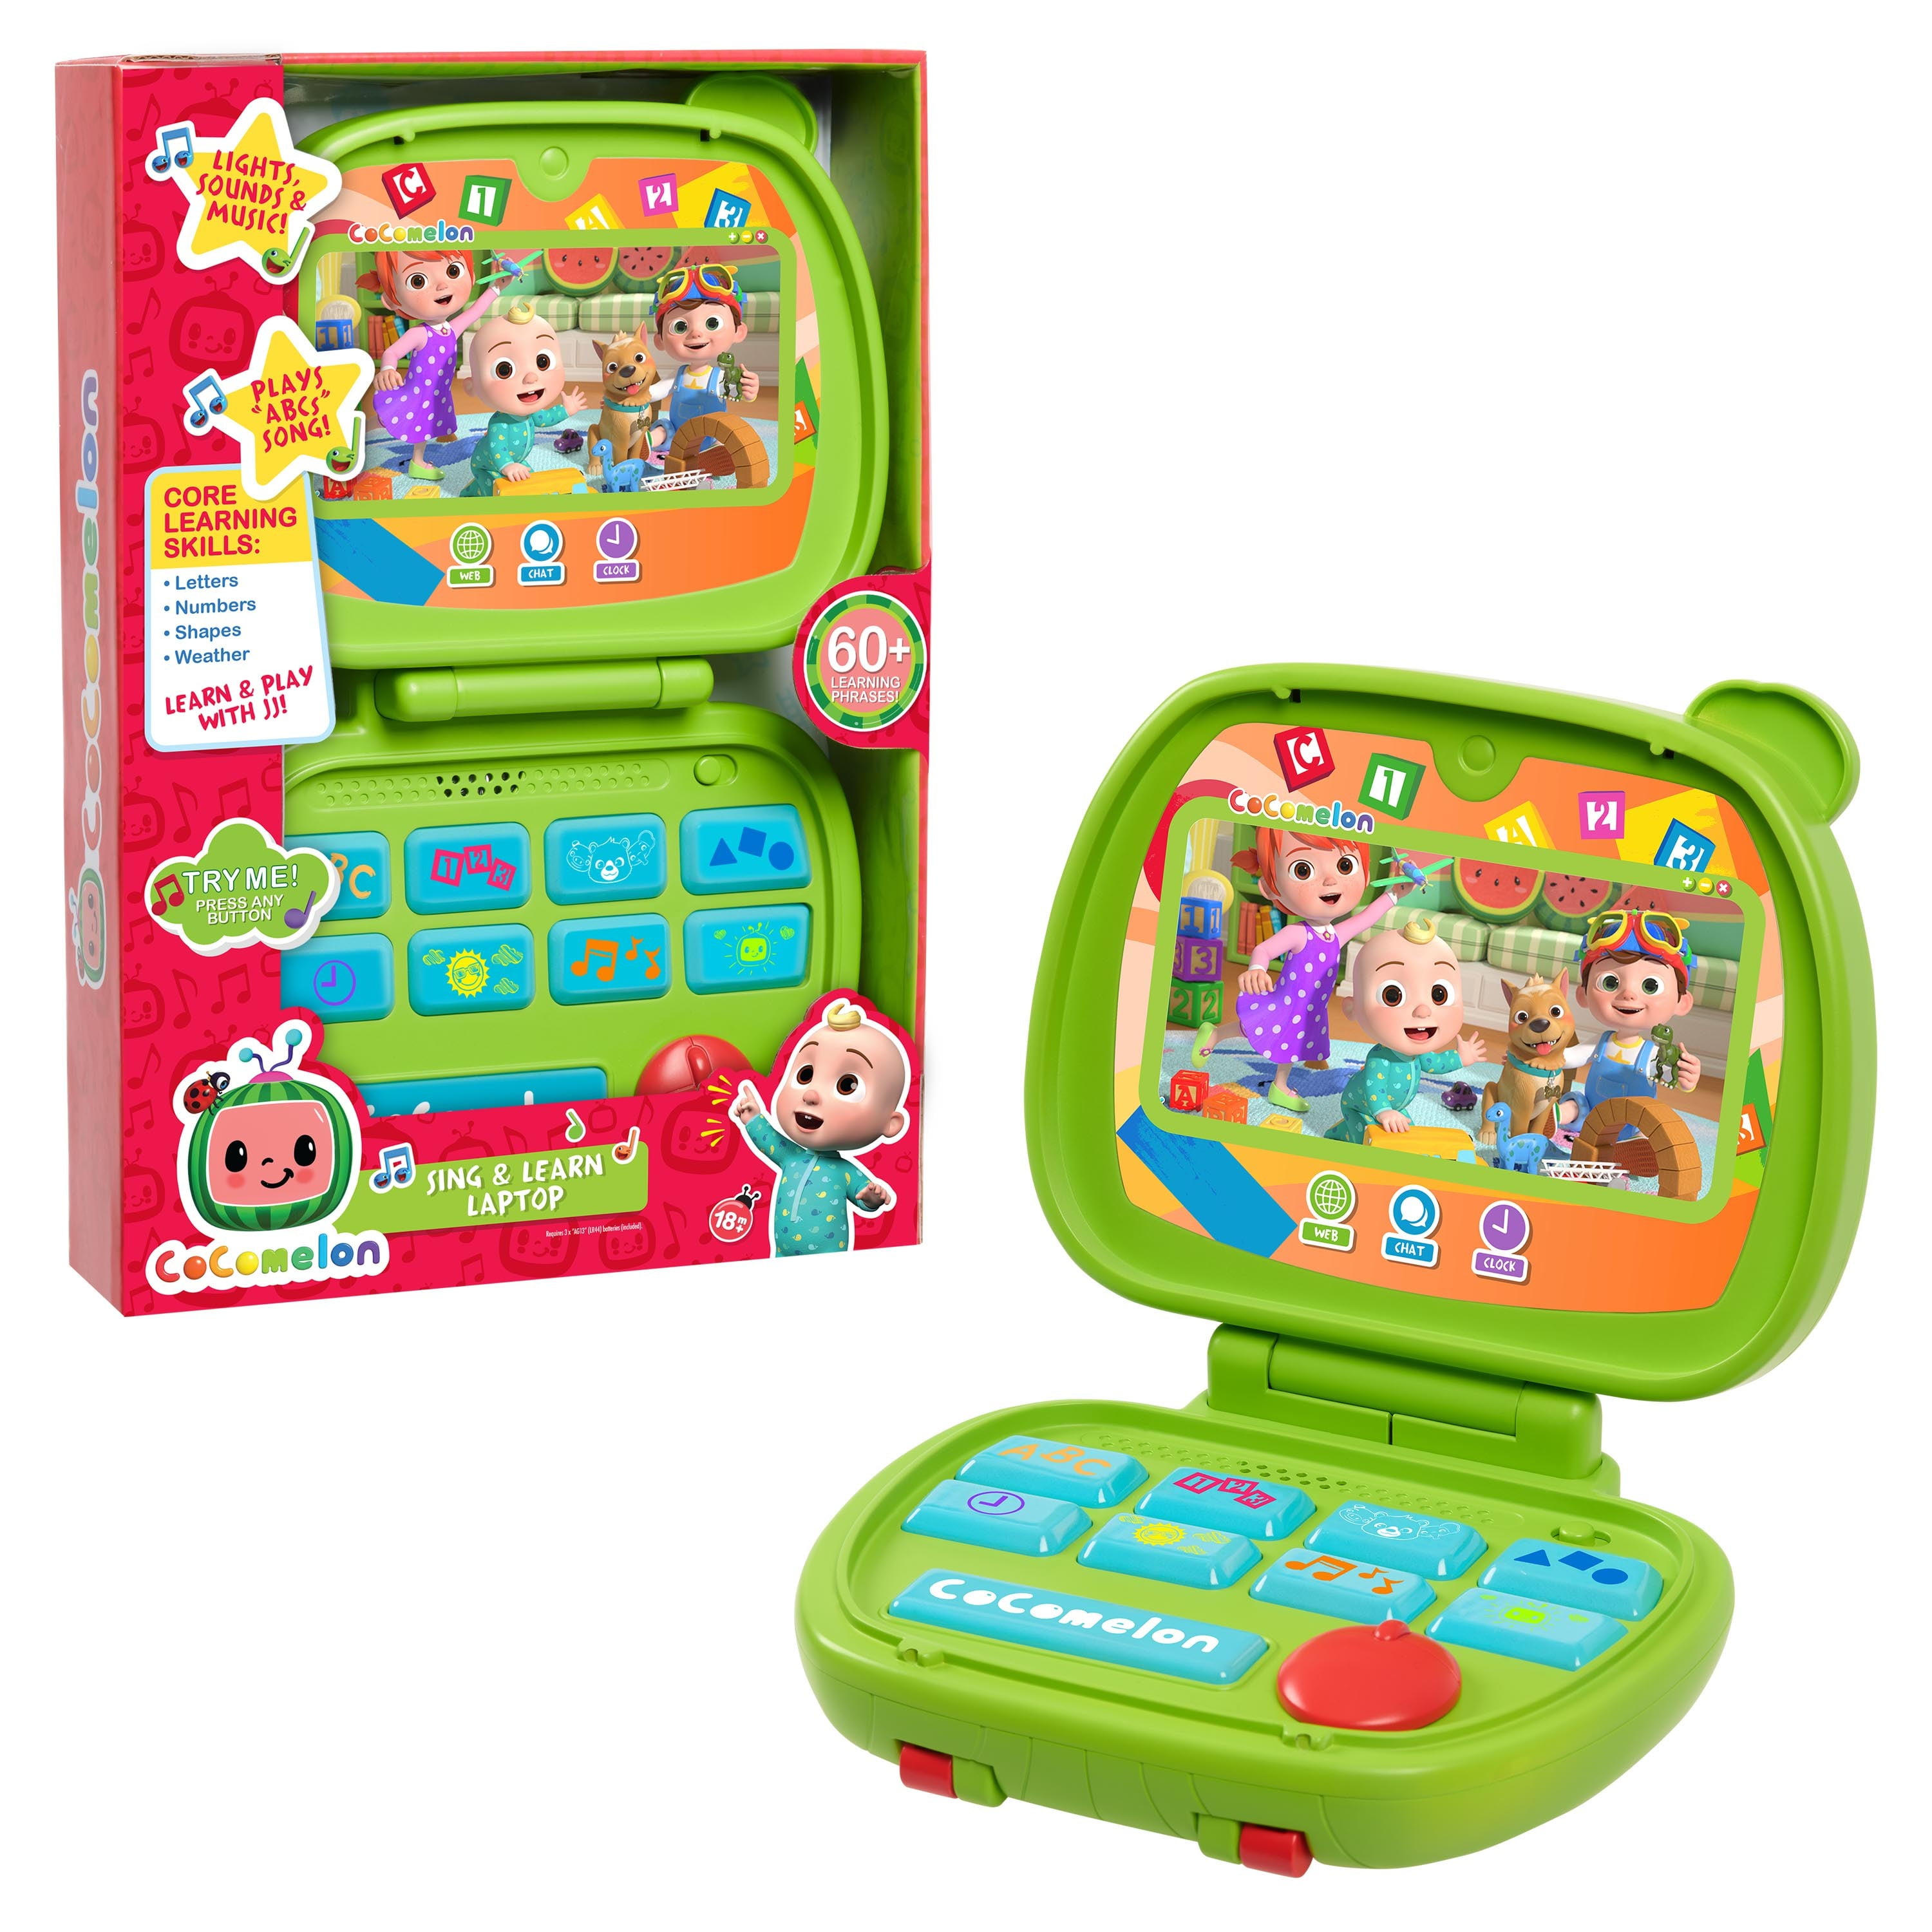 Computer Laptop Tablet Kids Educational Learning Machine New Toy Study N7C6 